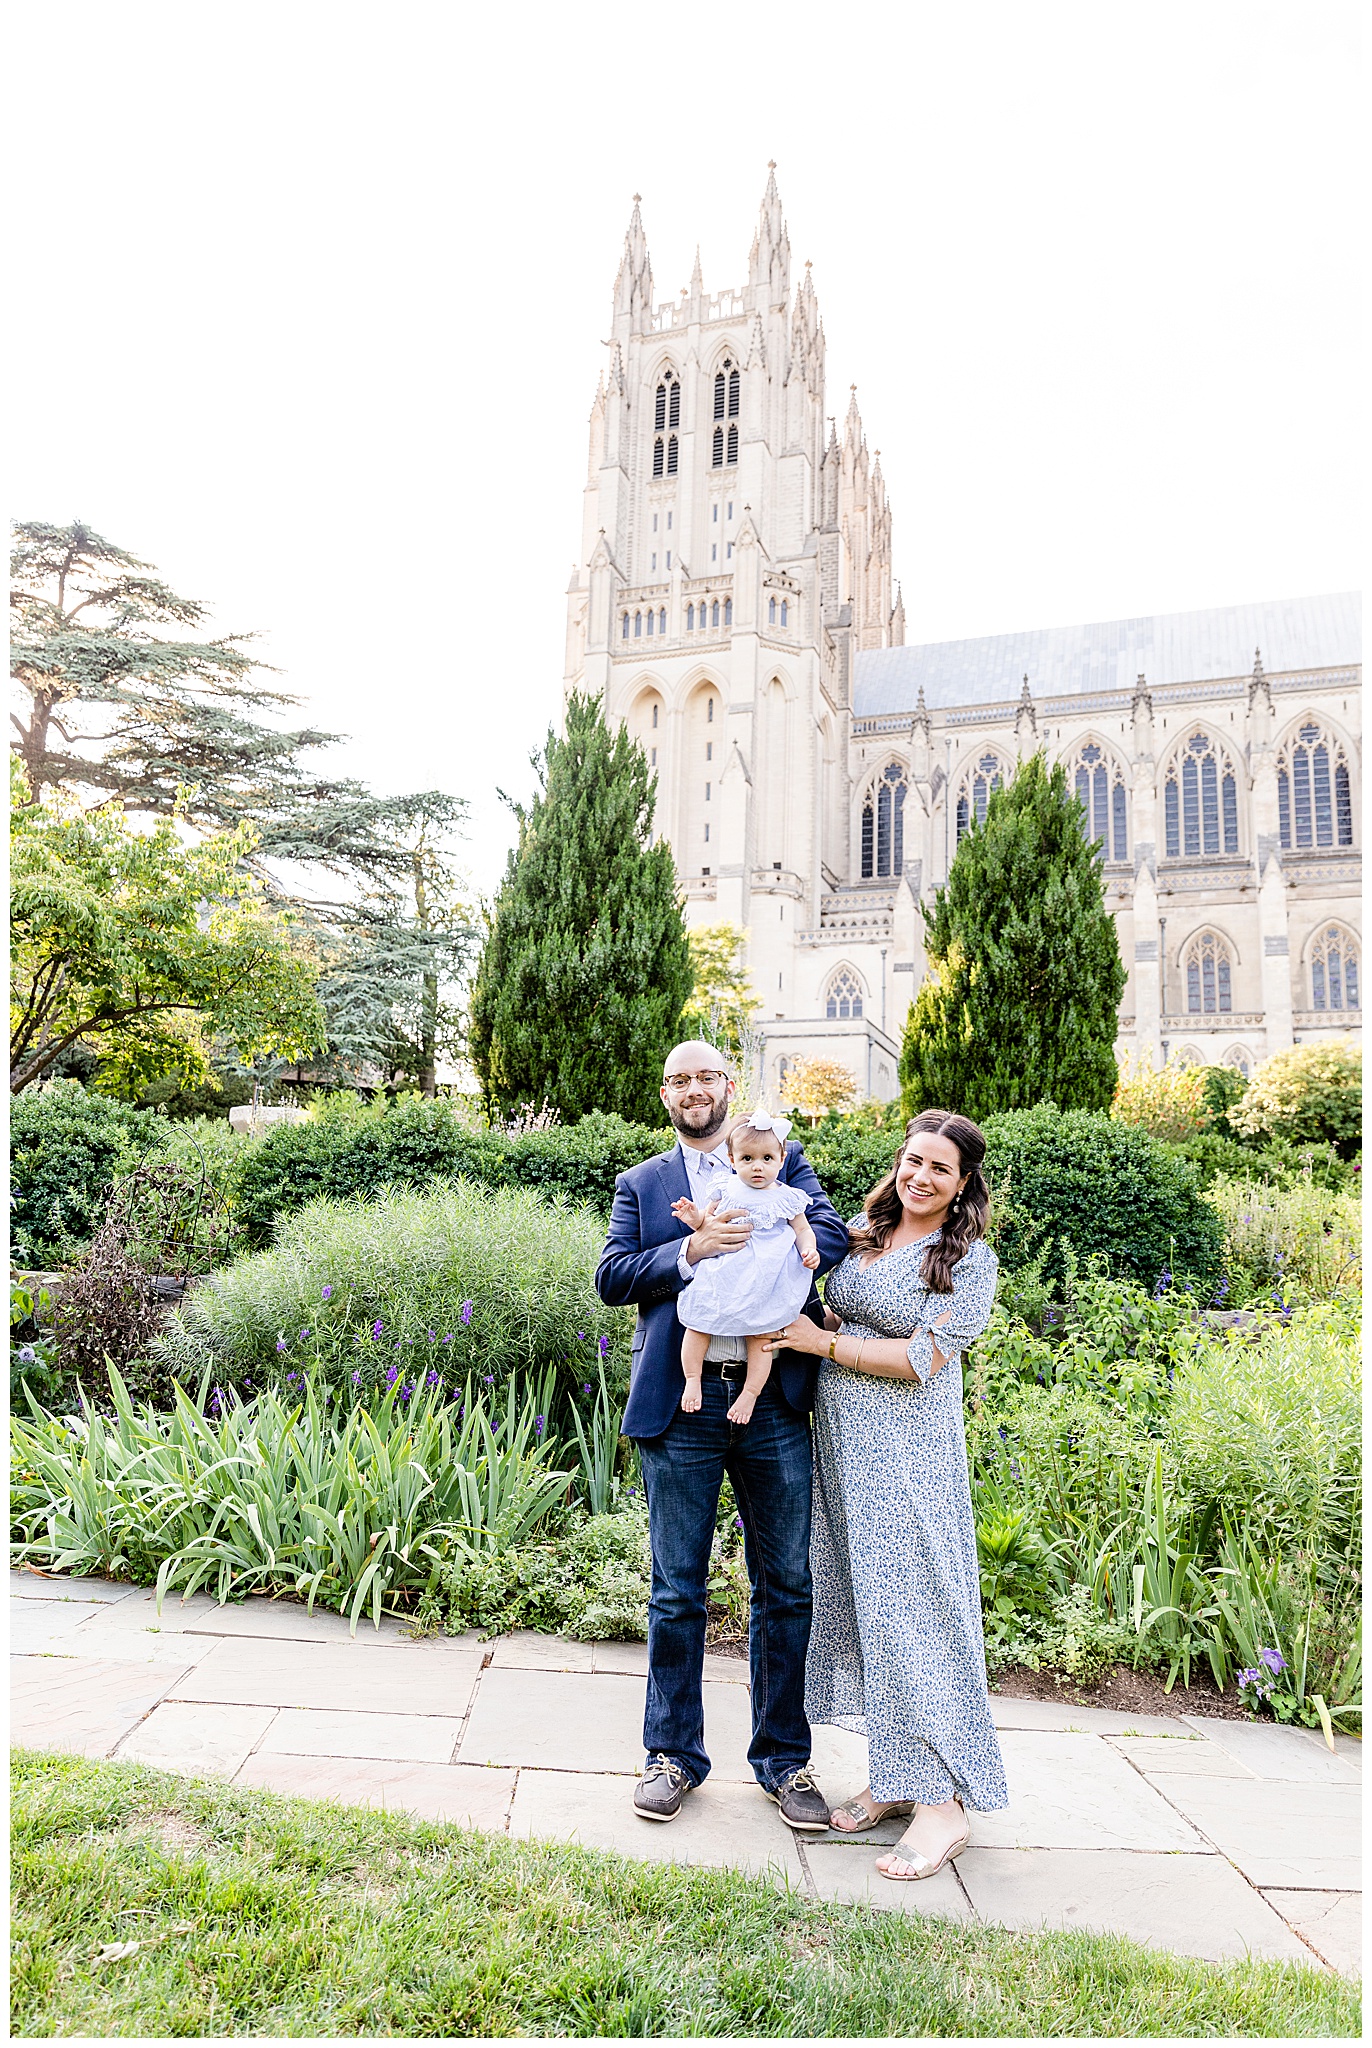 Family Photoshoot at Bishop's Garden by DC based photographer Bethany Brasfield Kofmehl